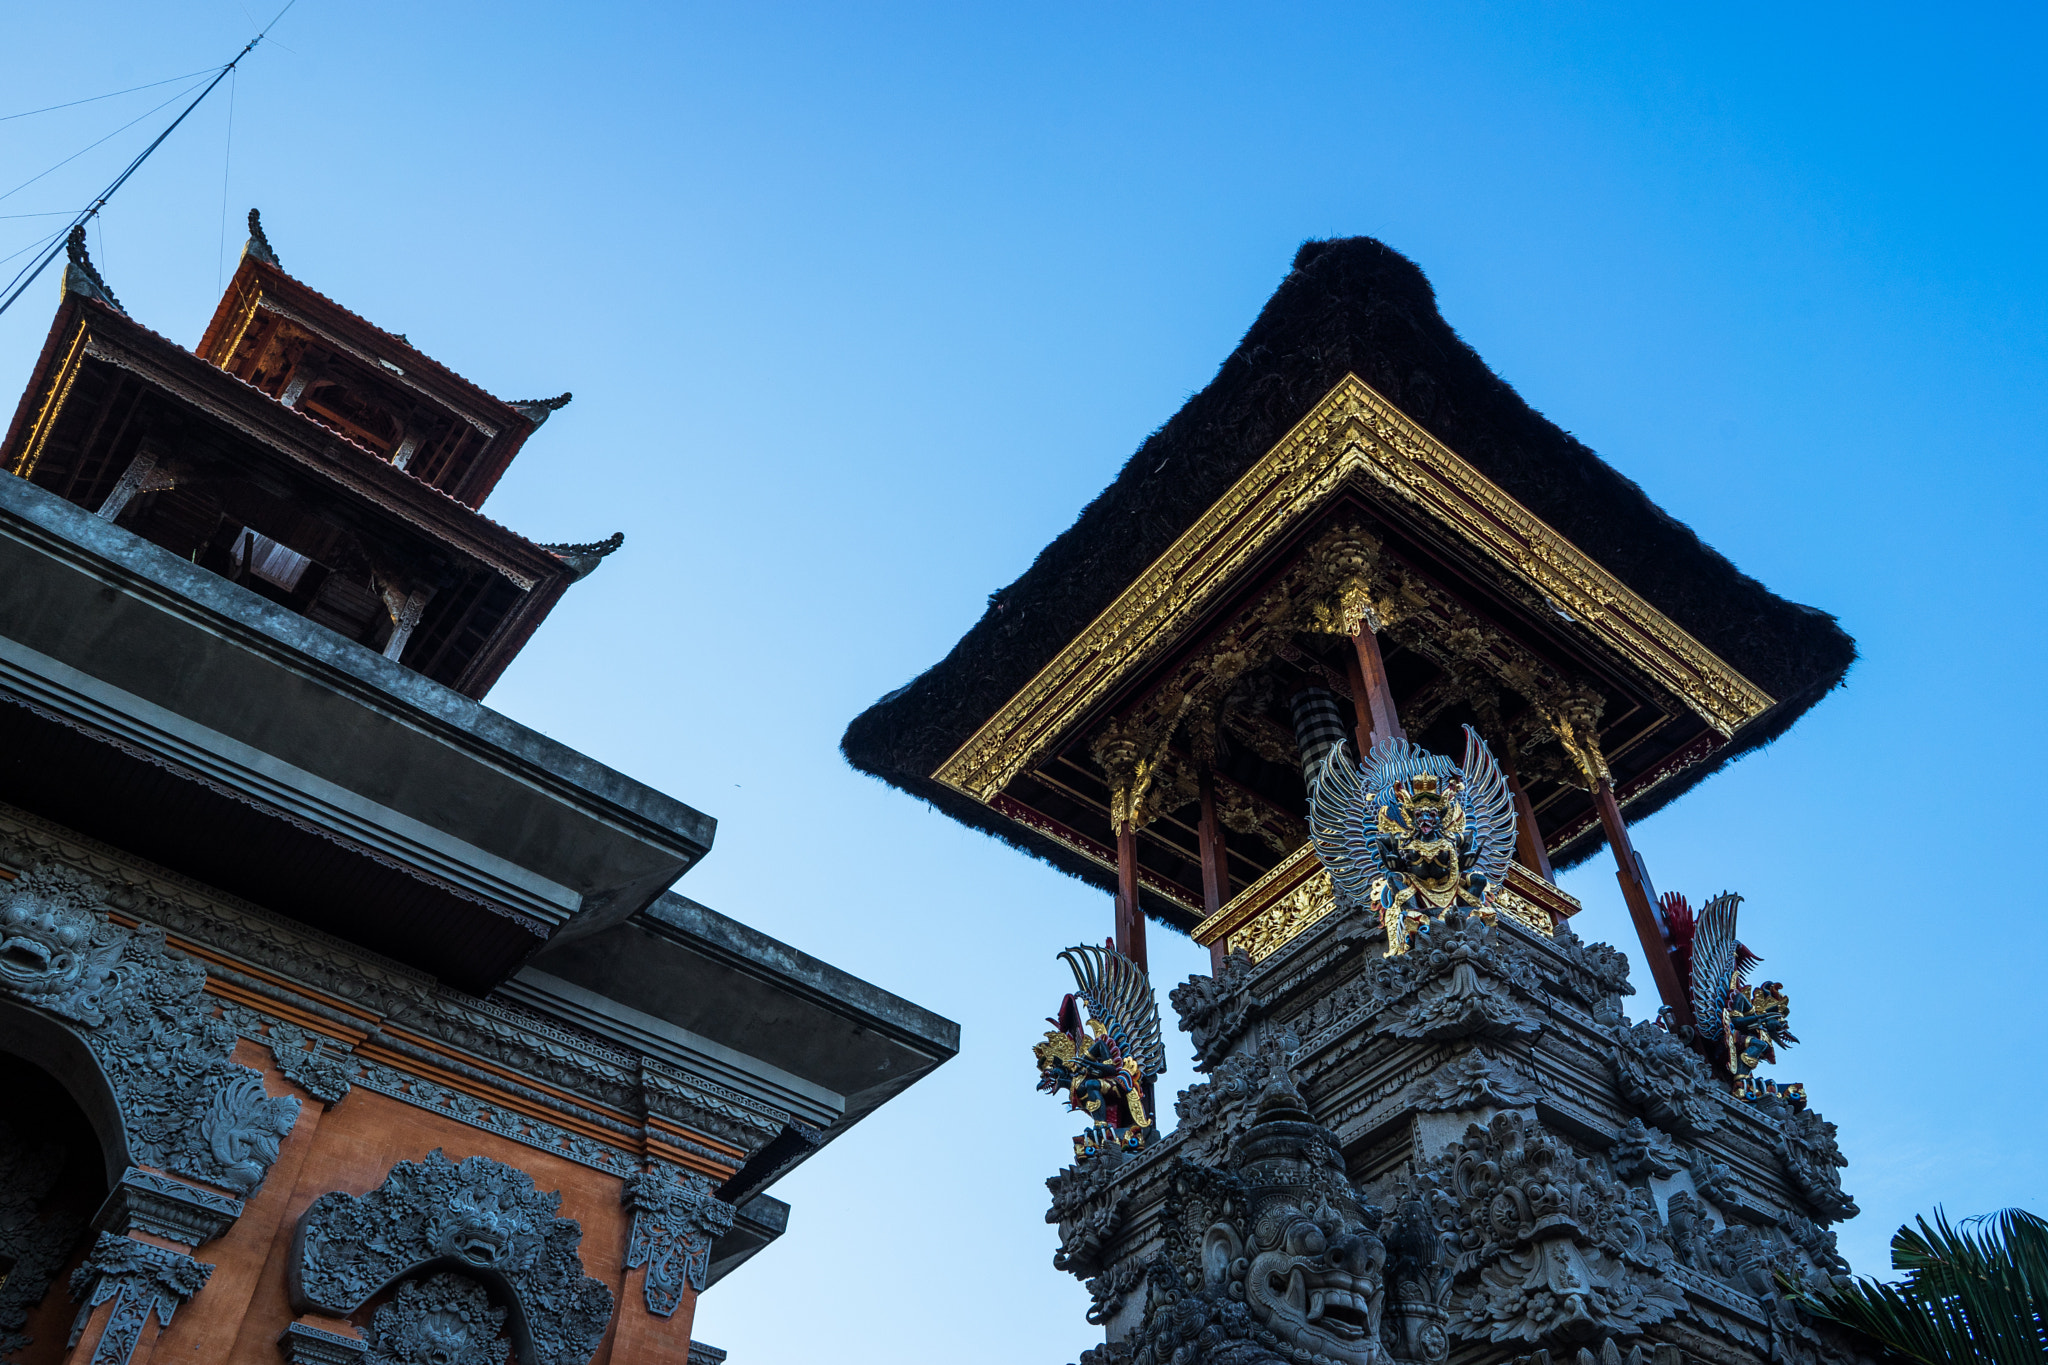 Sony a7 II sample photo. Bali's golden temple photography